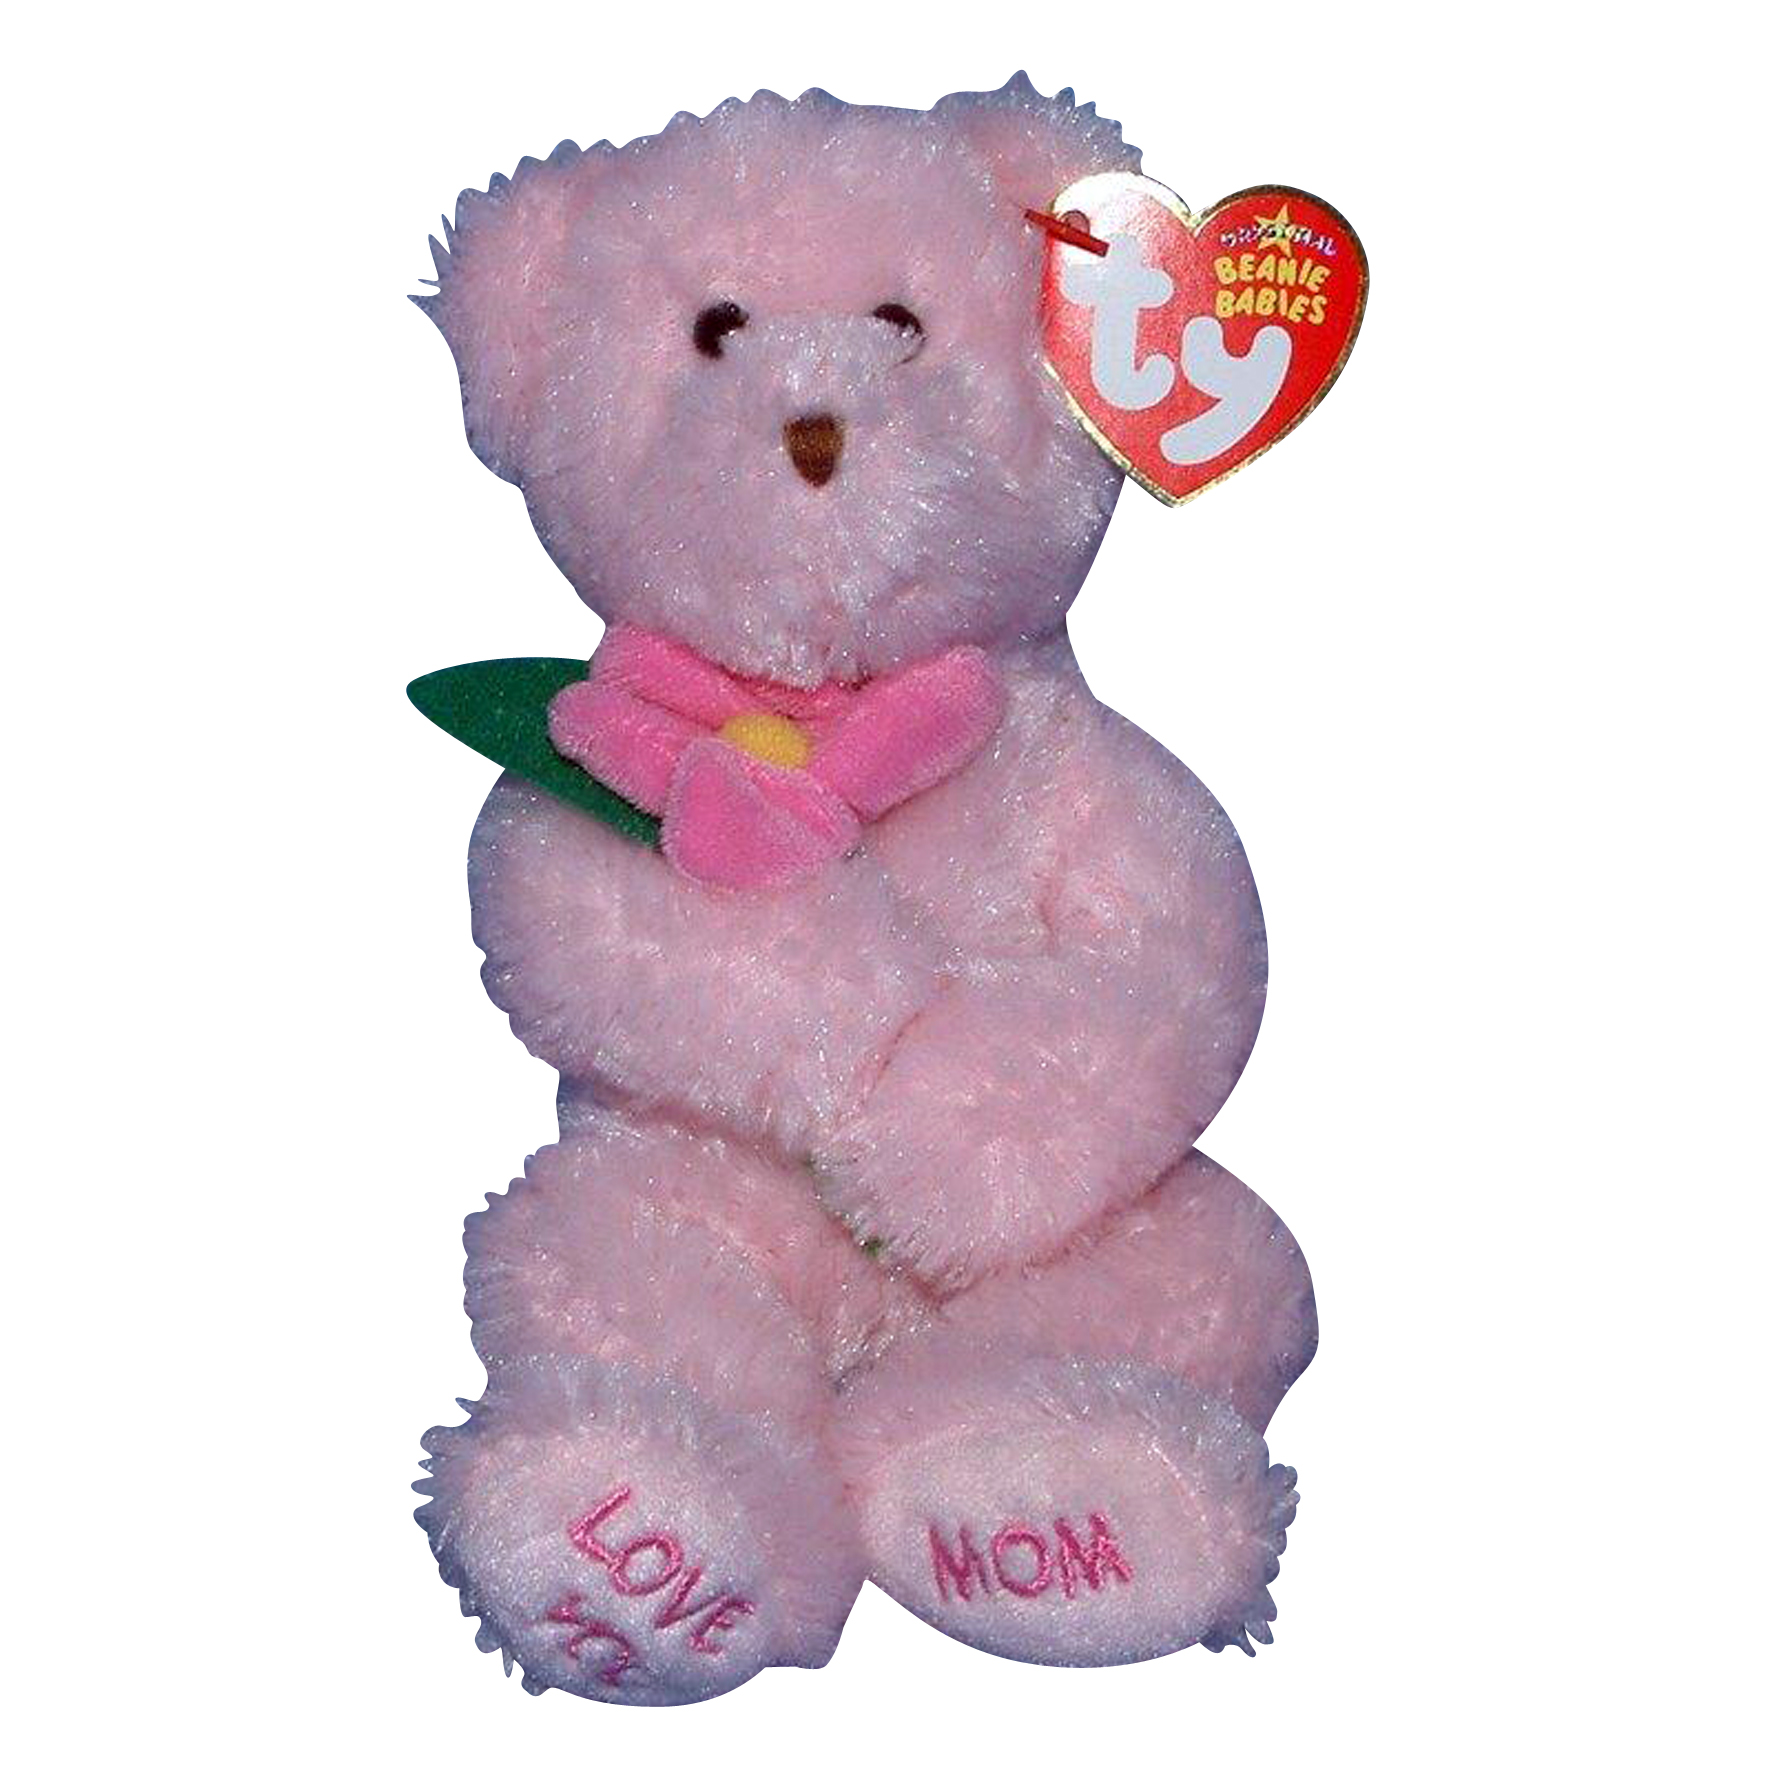 Retired 2006 Ty “dear Mom” Beanie Baby MWMT 13g Tush Covered 15g Swing for sale online